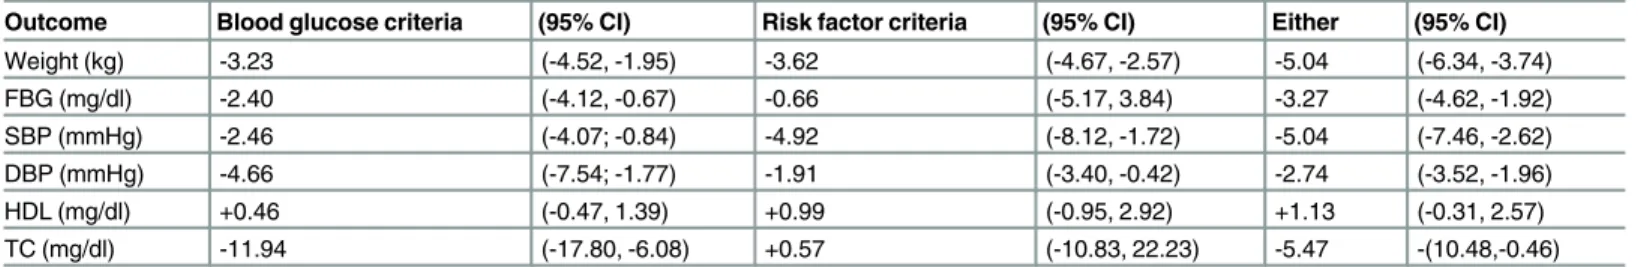 Table 5. Outcomes stratified by method used to determine “ high risk ” status. (Supporting forest plots in S7 Fig.)